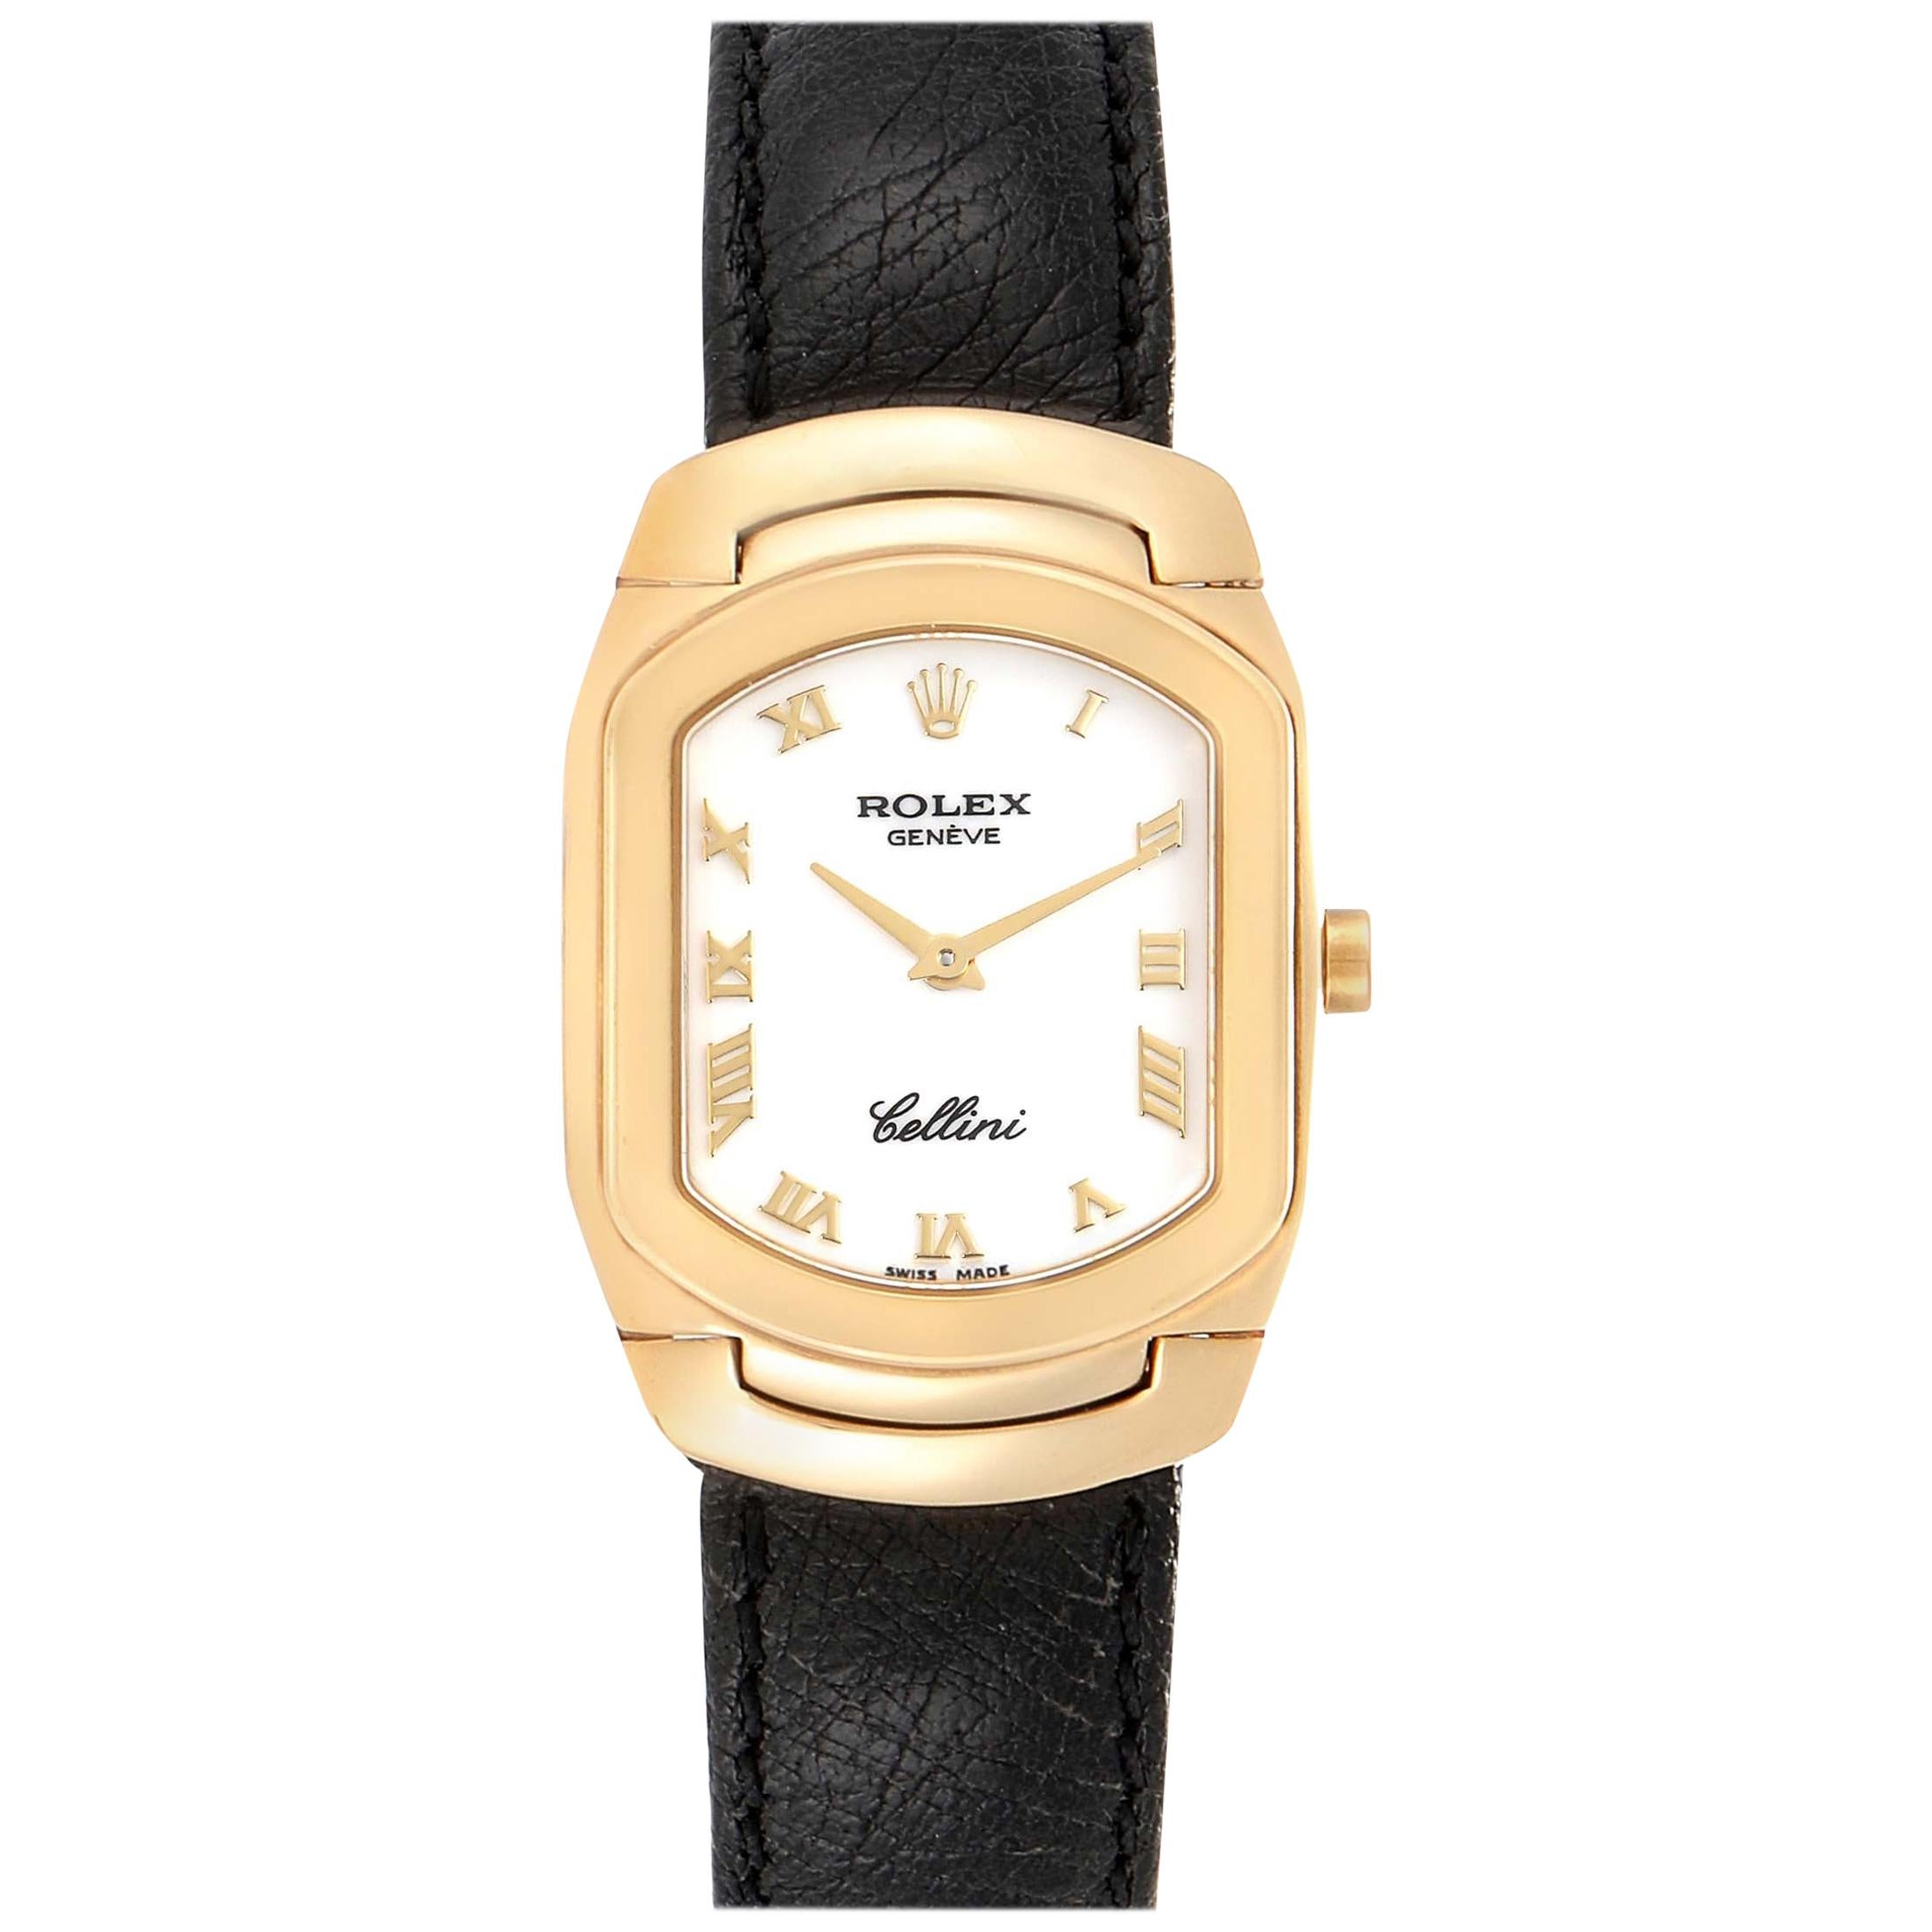 Rolex Cellini Cellissima Yellow Gold White Dial Ladies Watch 6631 For Sale